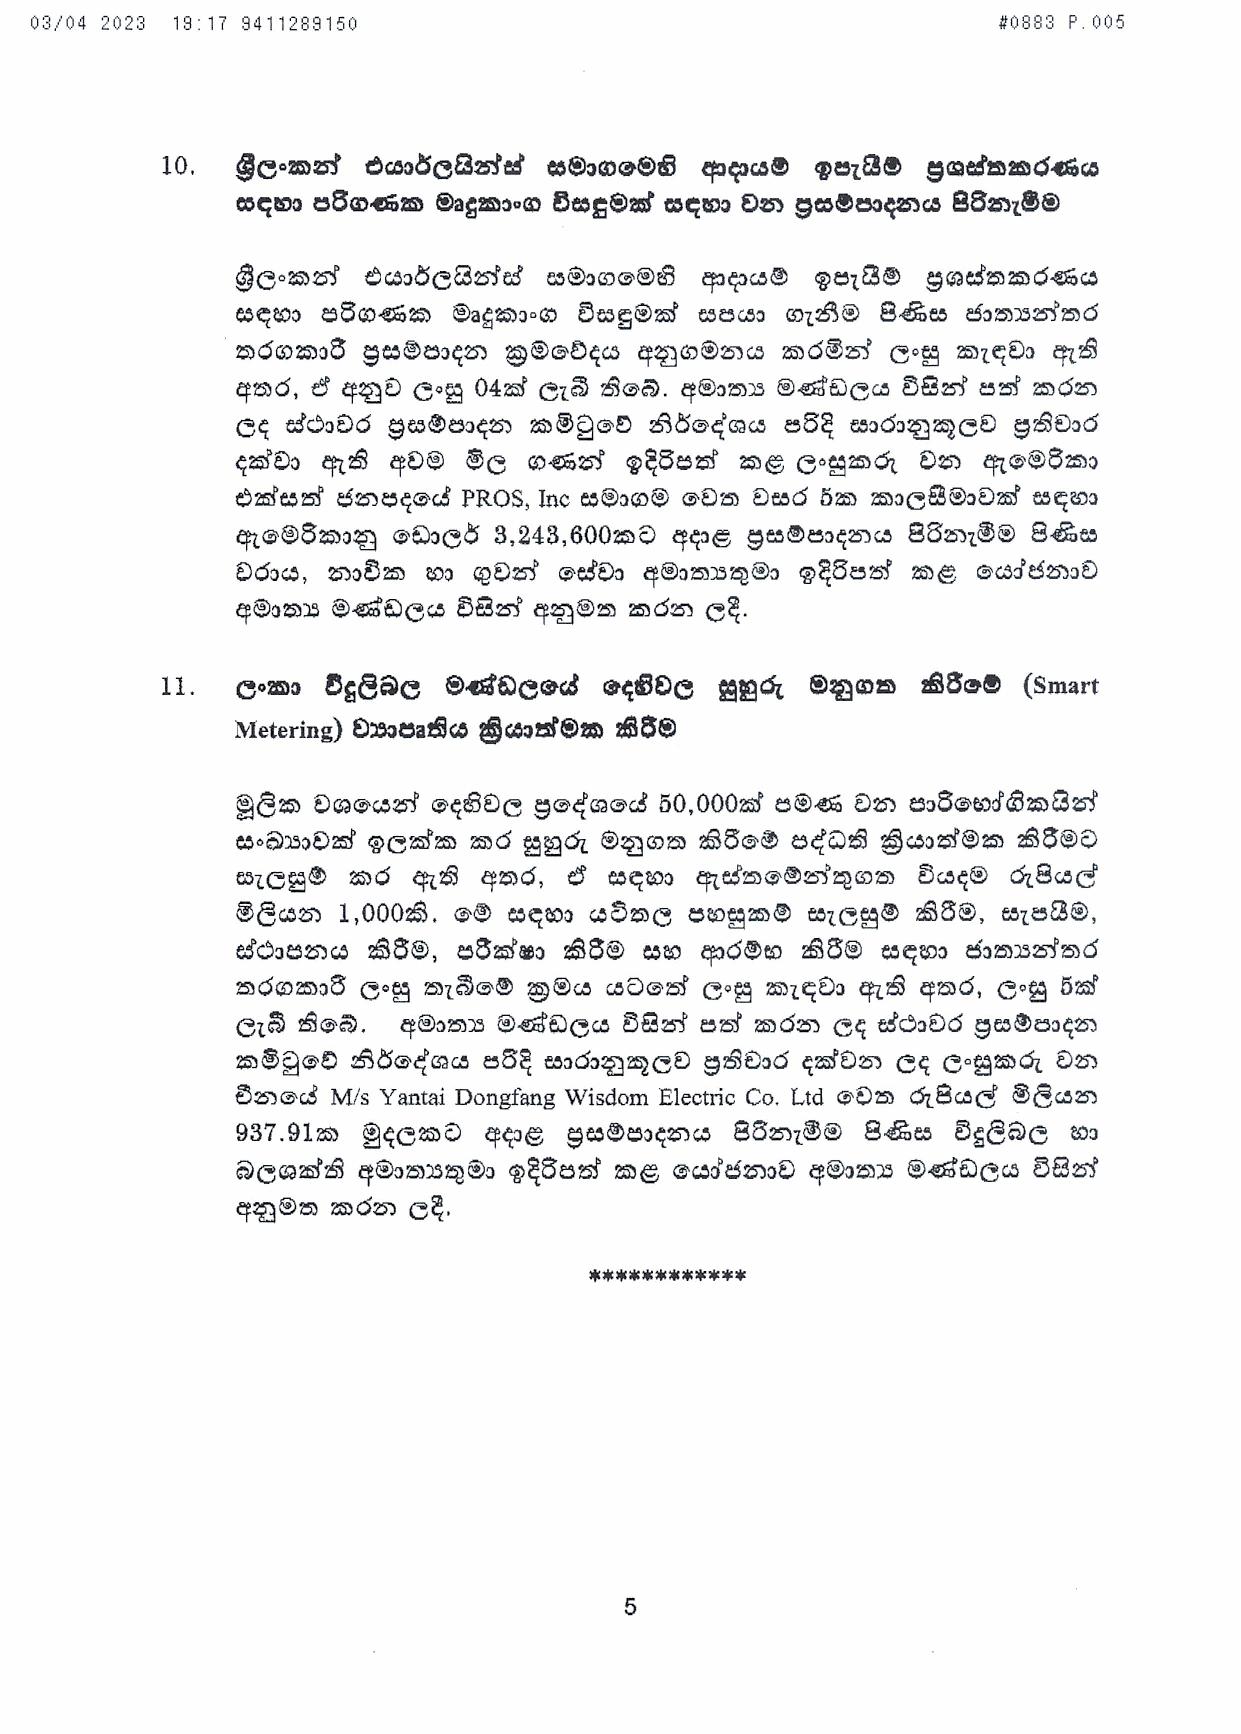 Cabinet Decision on 03.04.2023 page 005